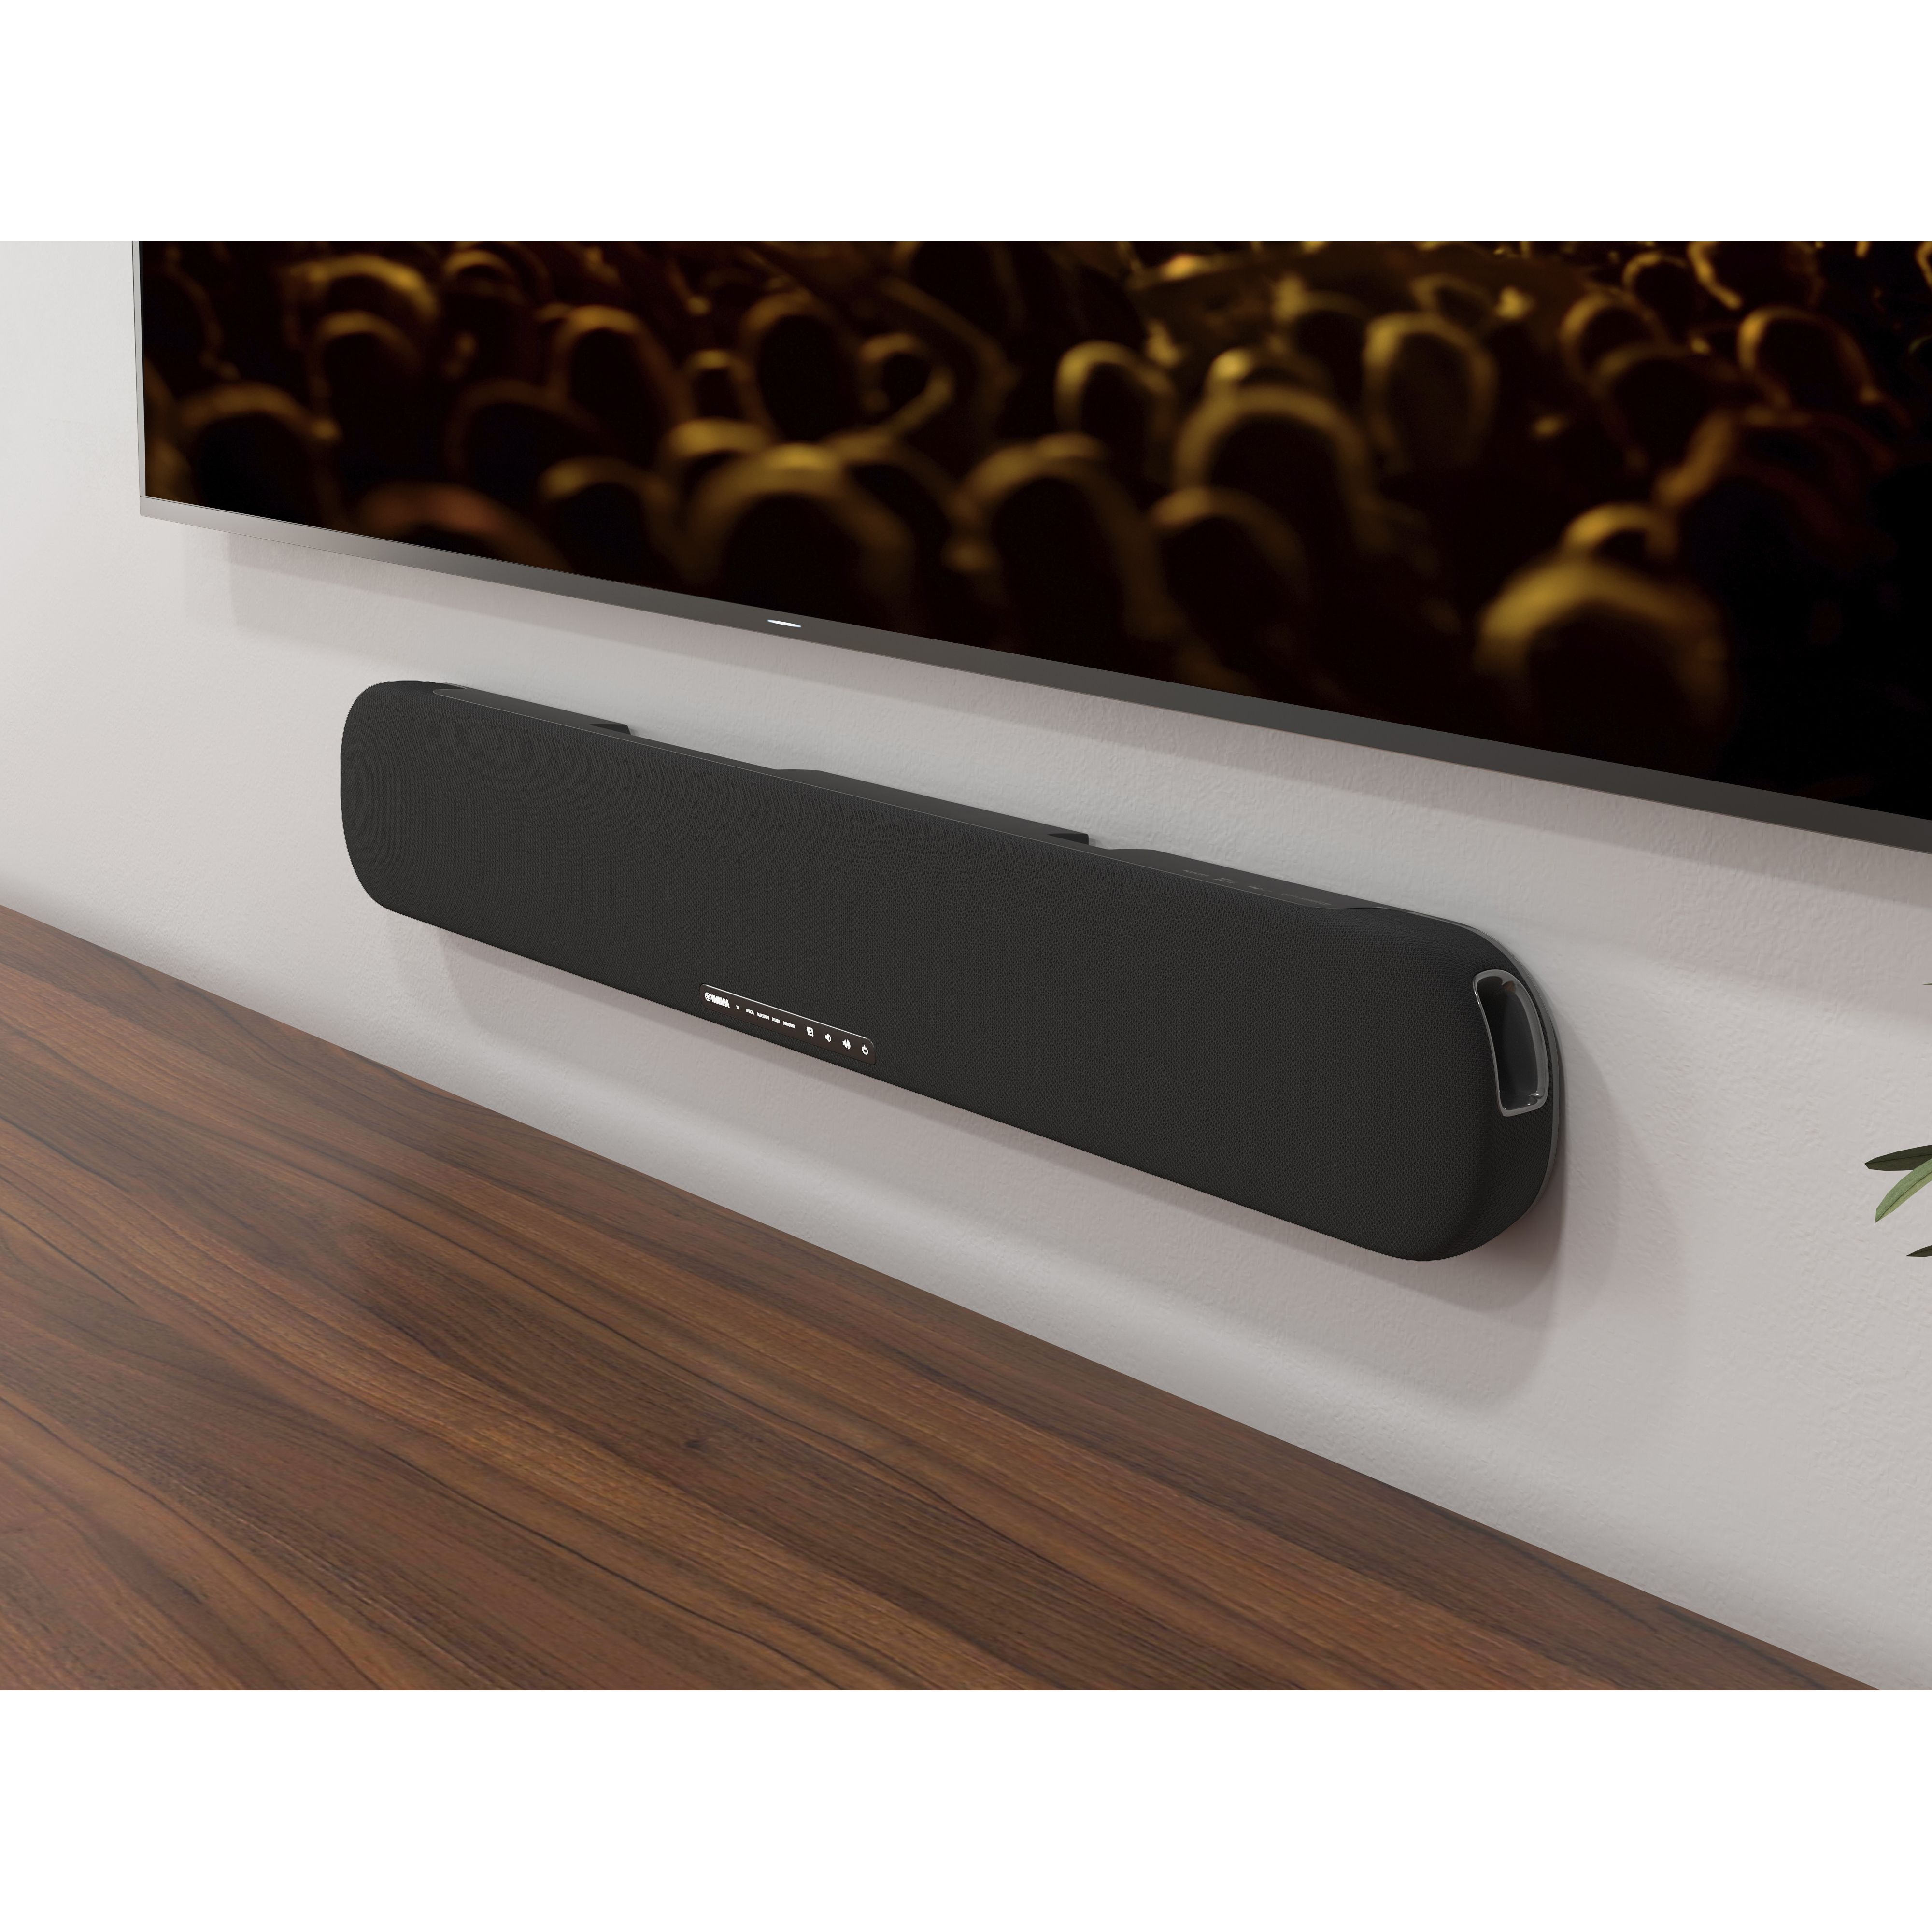 Specs: SR-B20A Sound Bar with Built-in Subwoofers - Yamaha USA